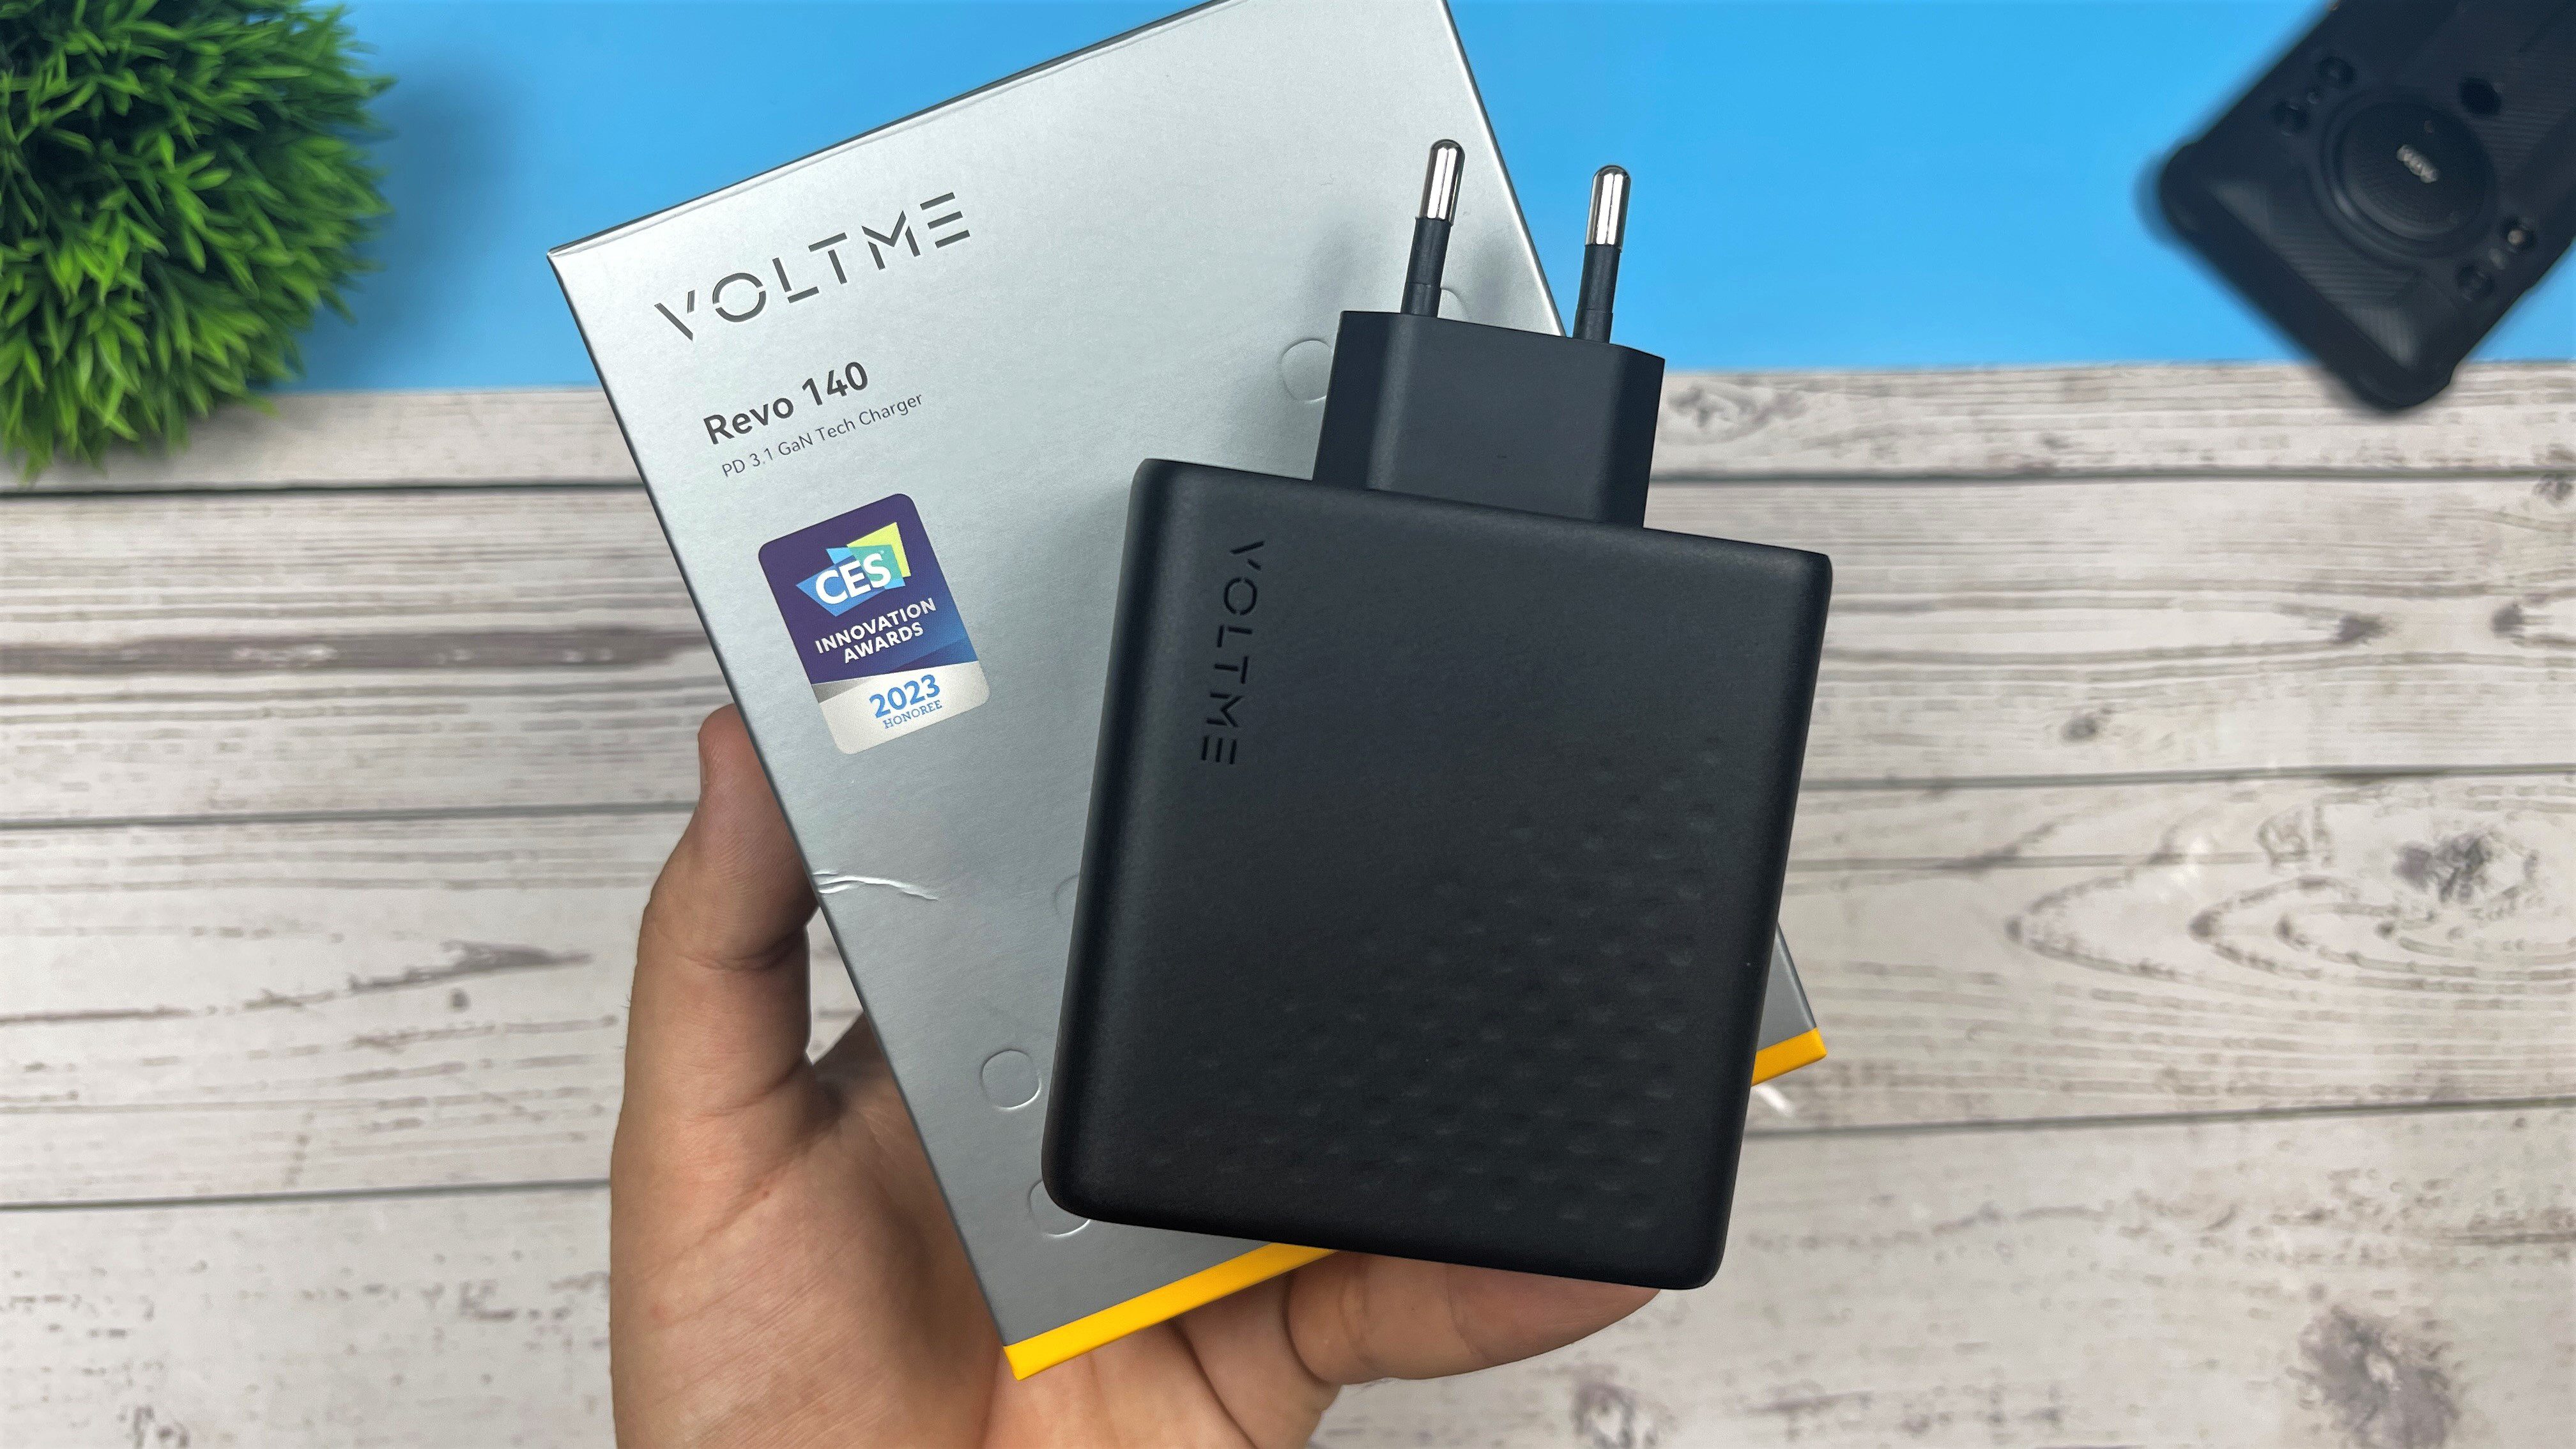 VOLTME Revo 140 3.1 GaN Fast Charger Review - The All-in-One Charging Solution for Gadget